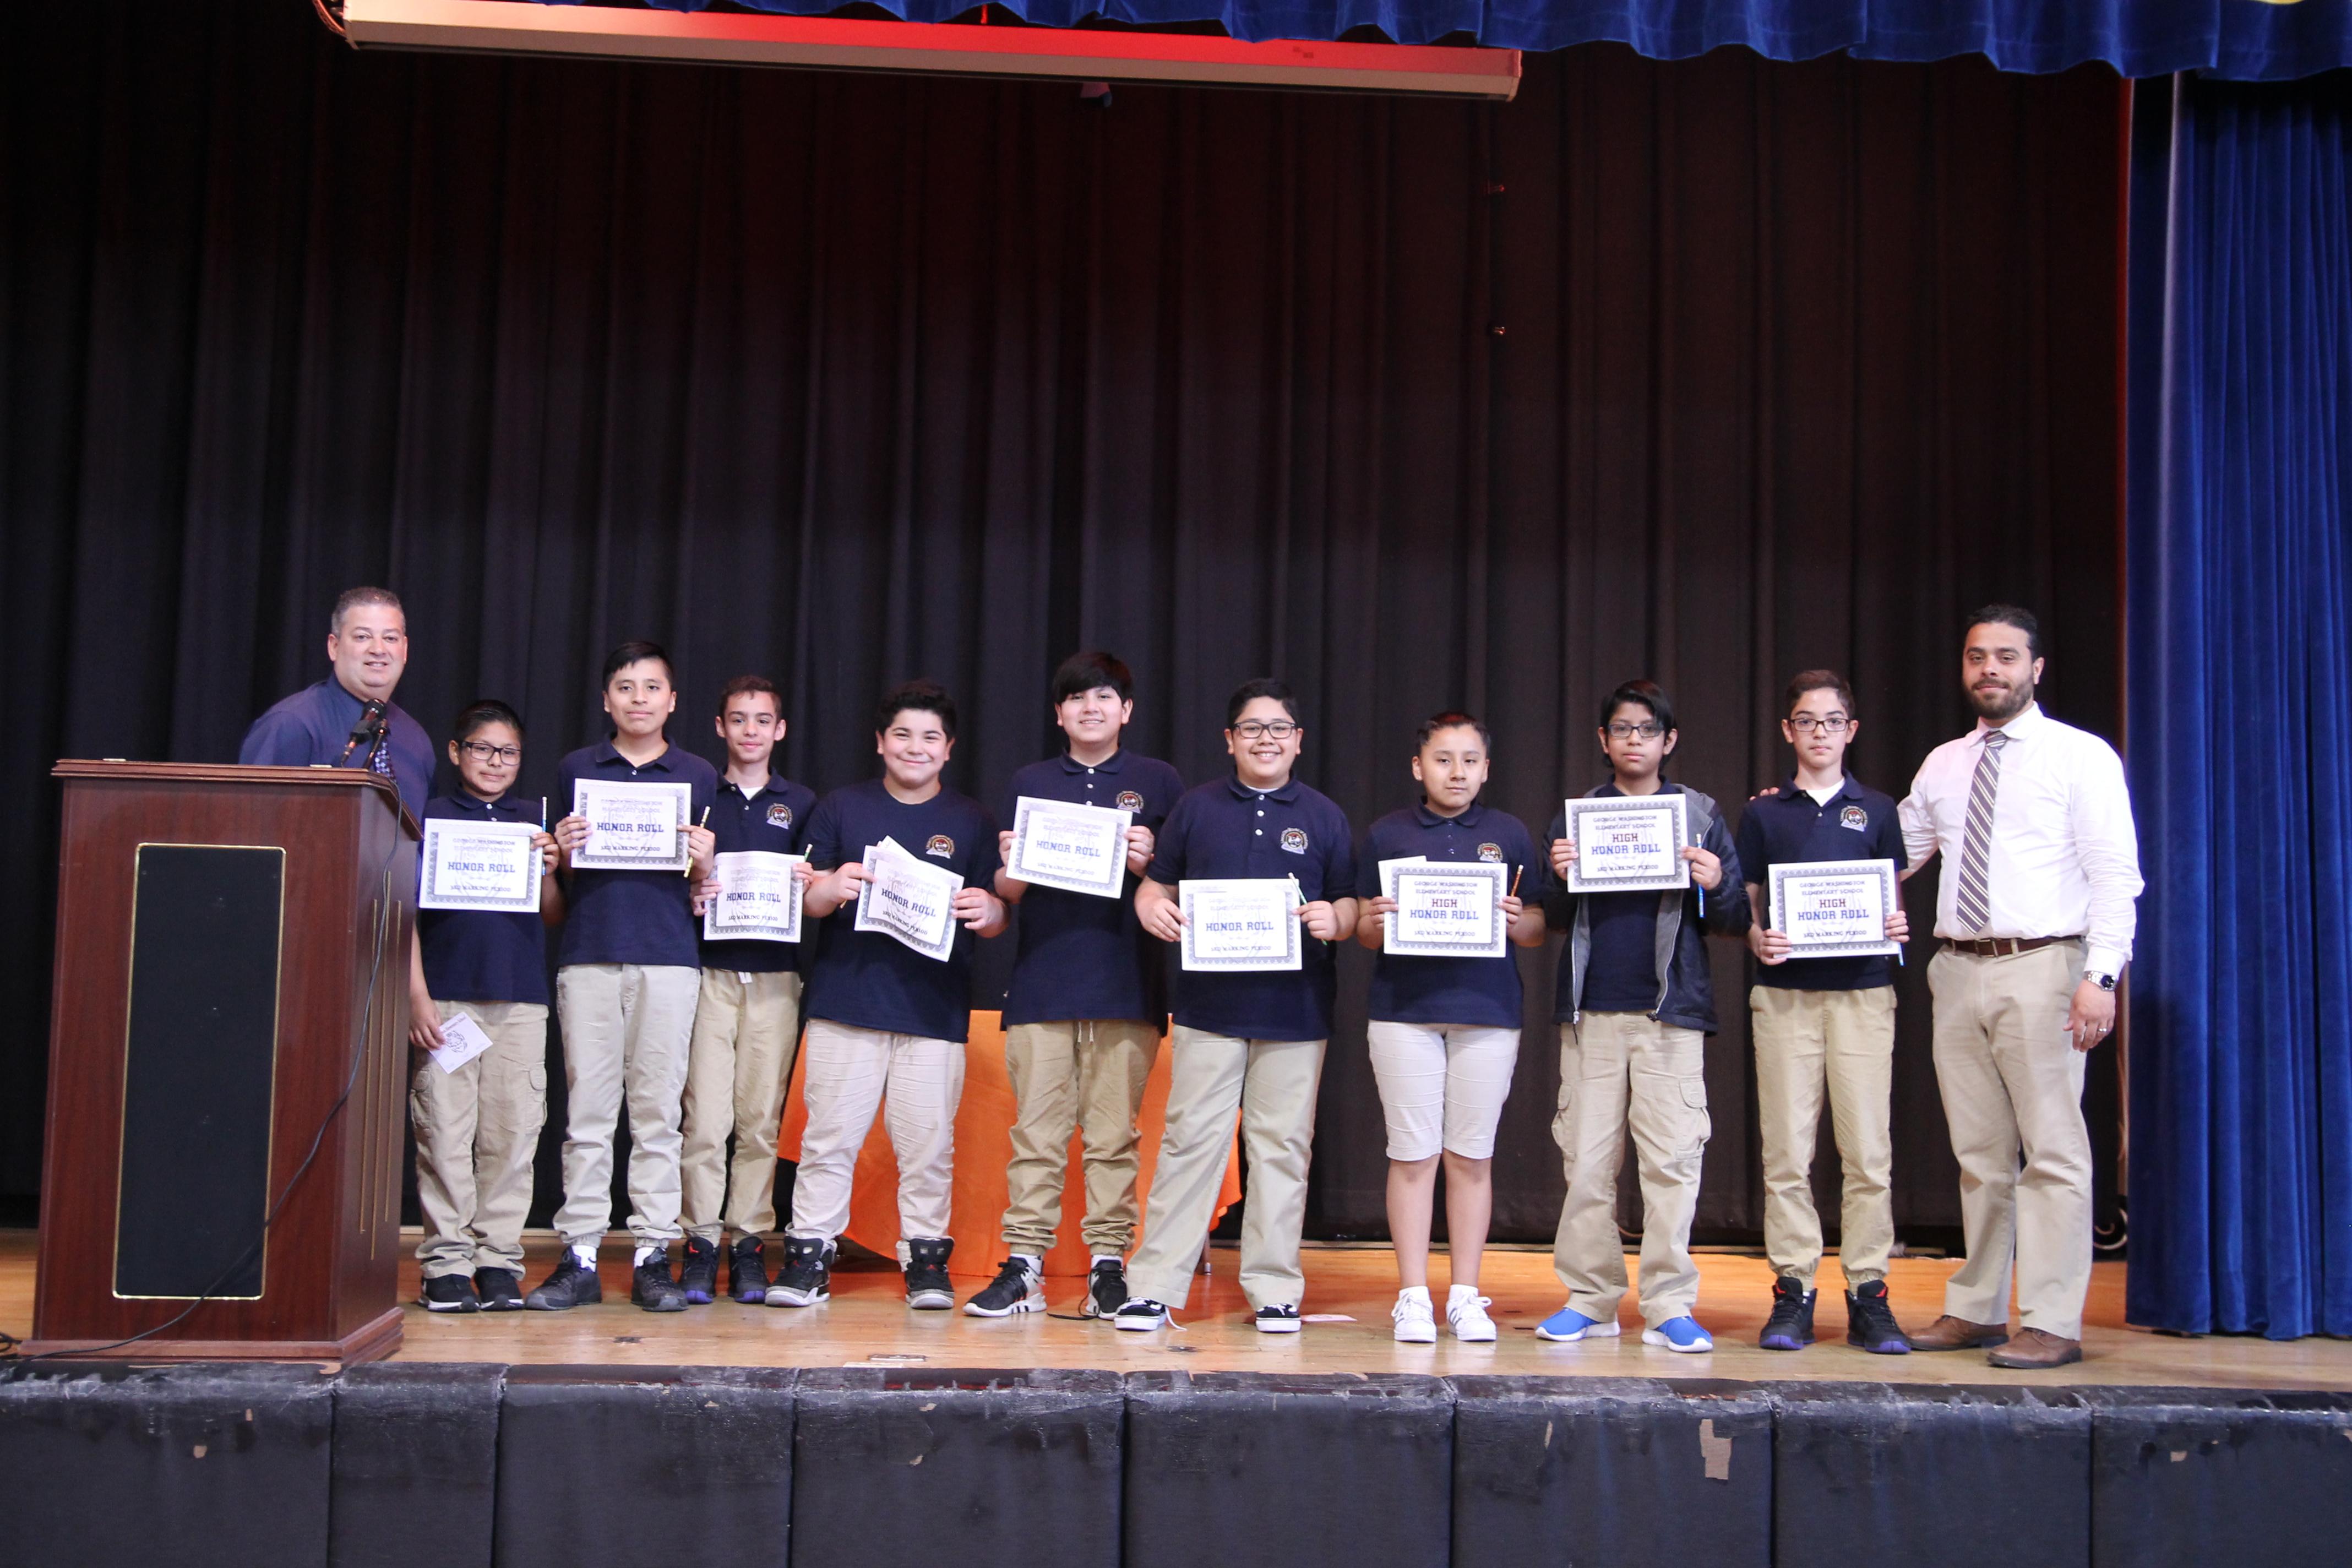 5th grade honor roll students